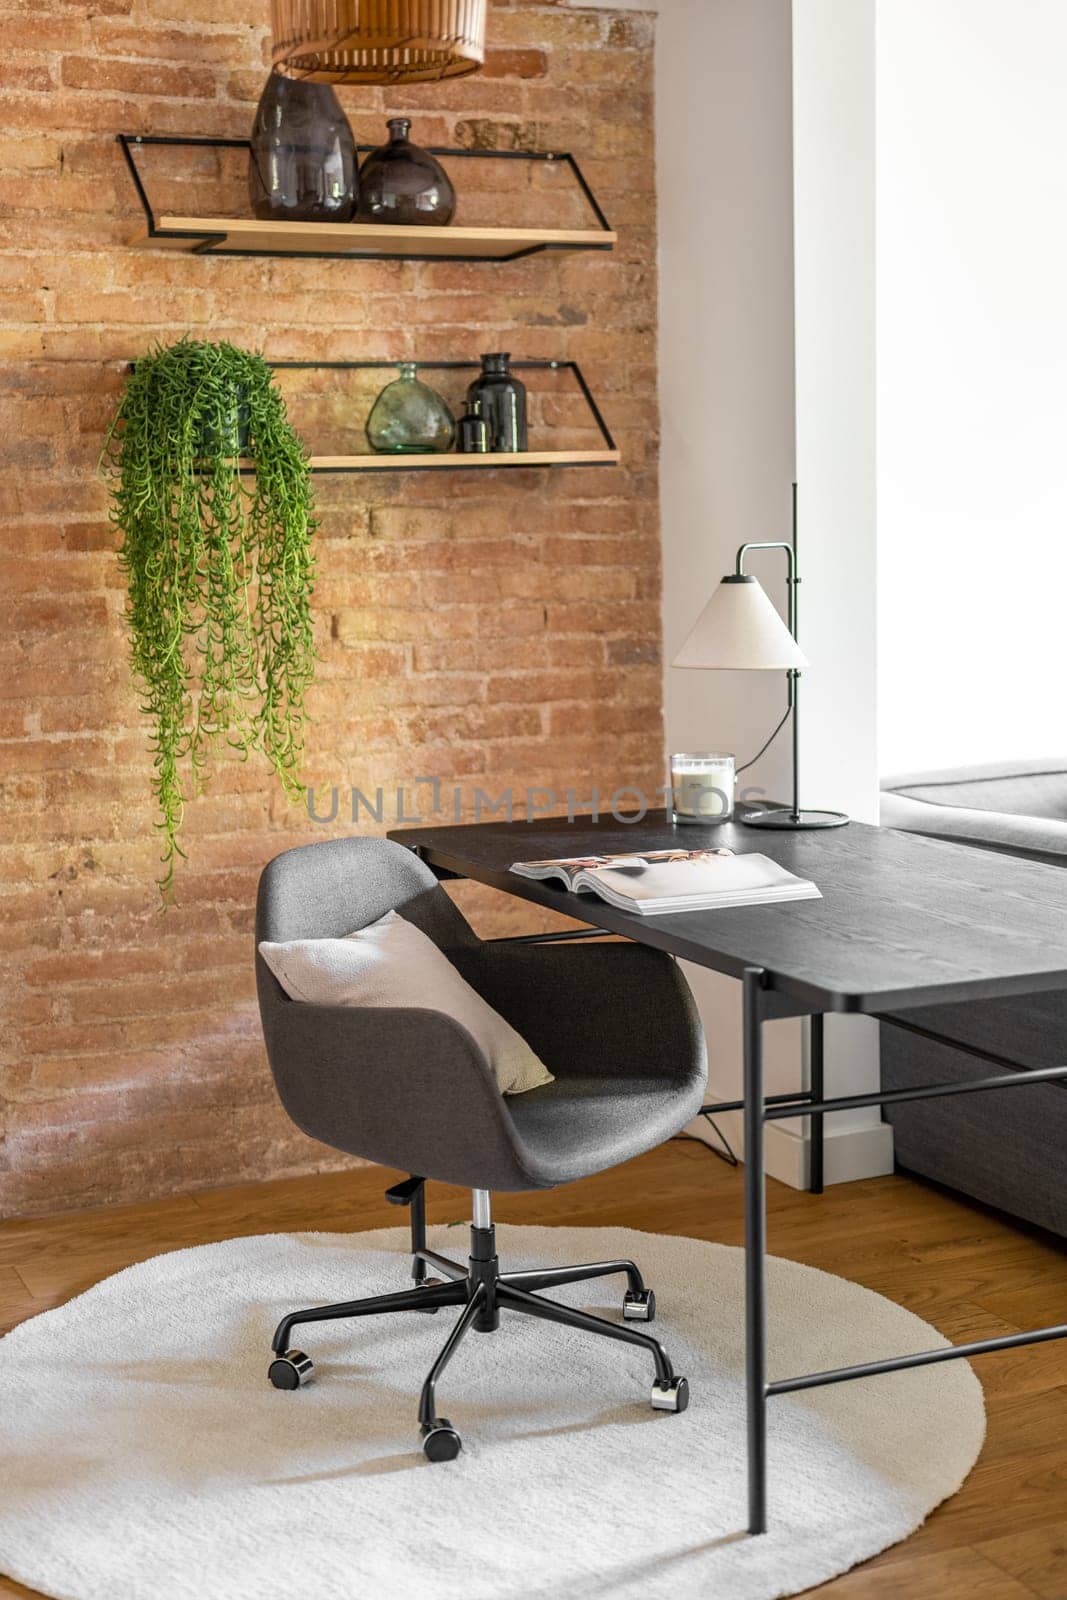 Design furniture bright work area at brick wall and pot-plant by apavlin